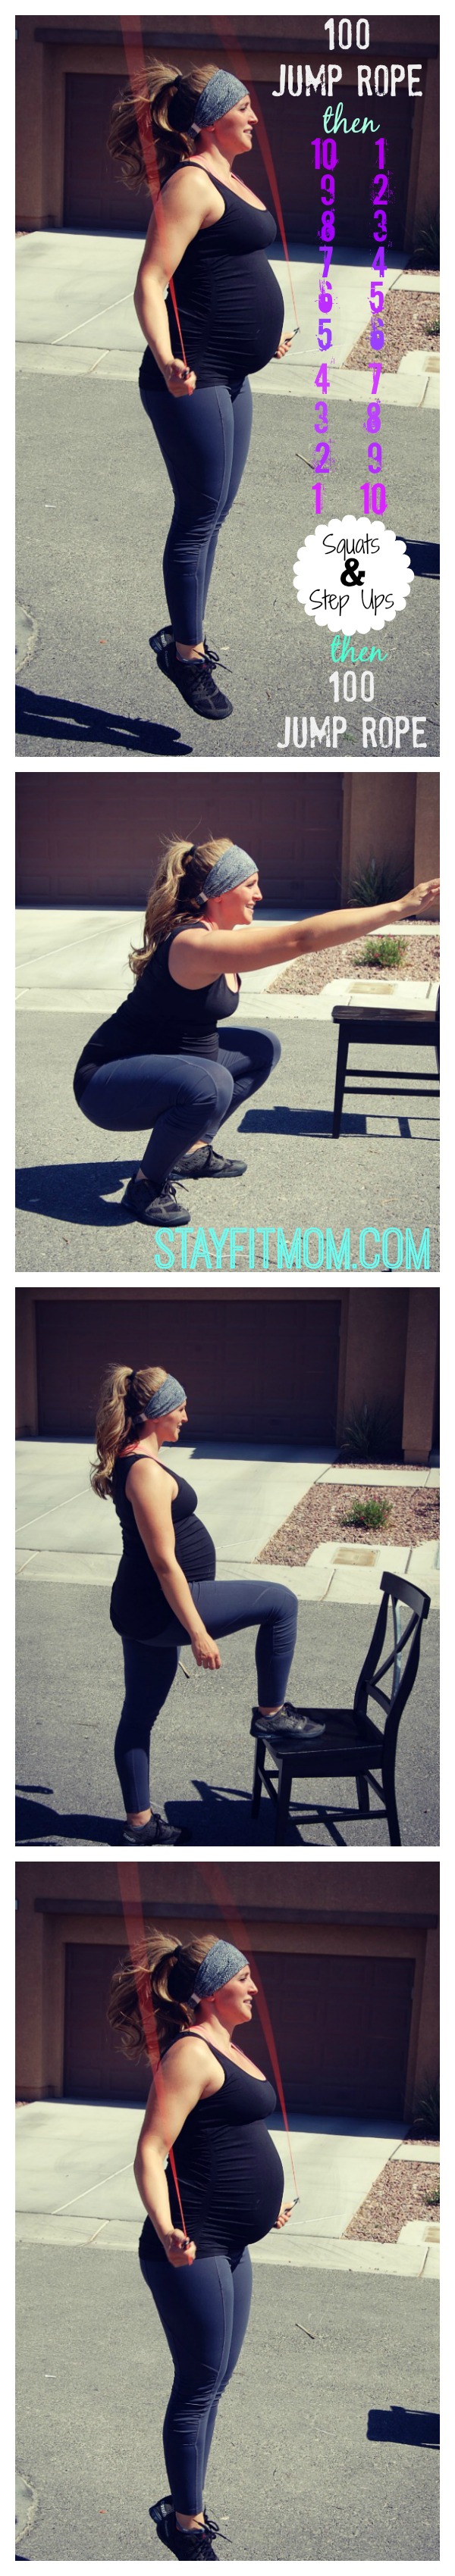 CrossFit workouts for women (even pregnant mamas) from StayFitMom.com.